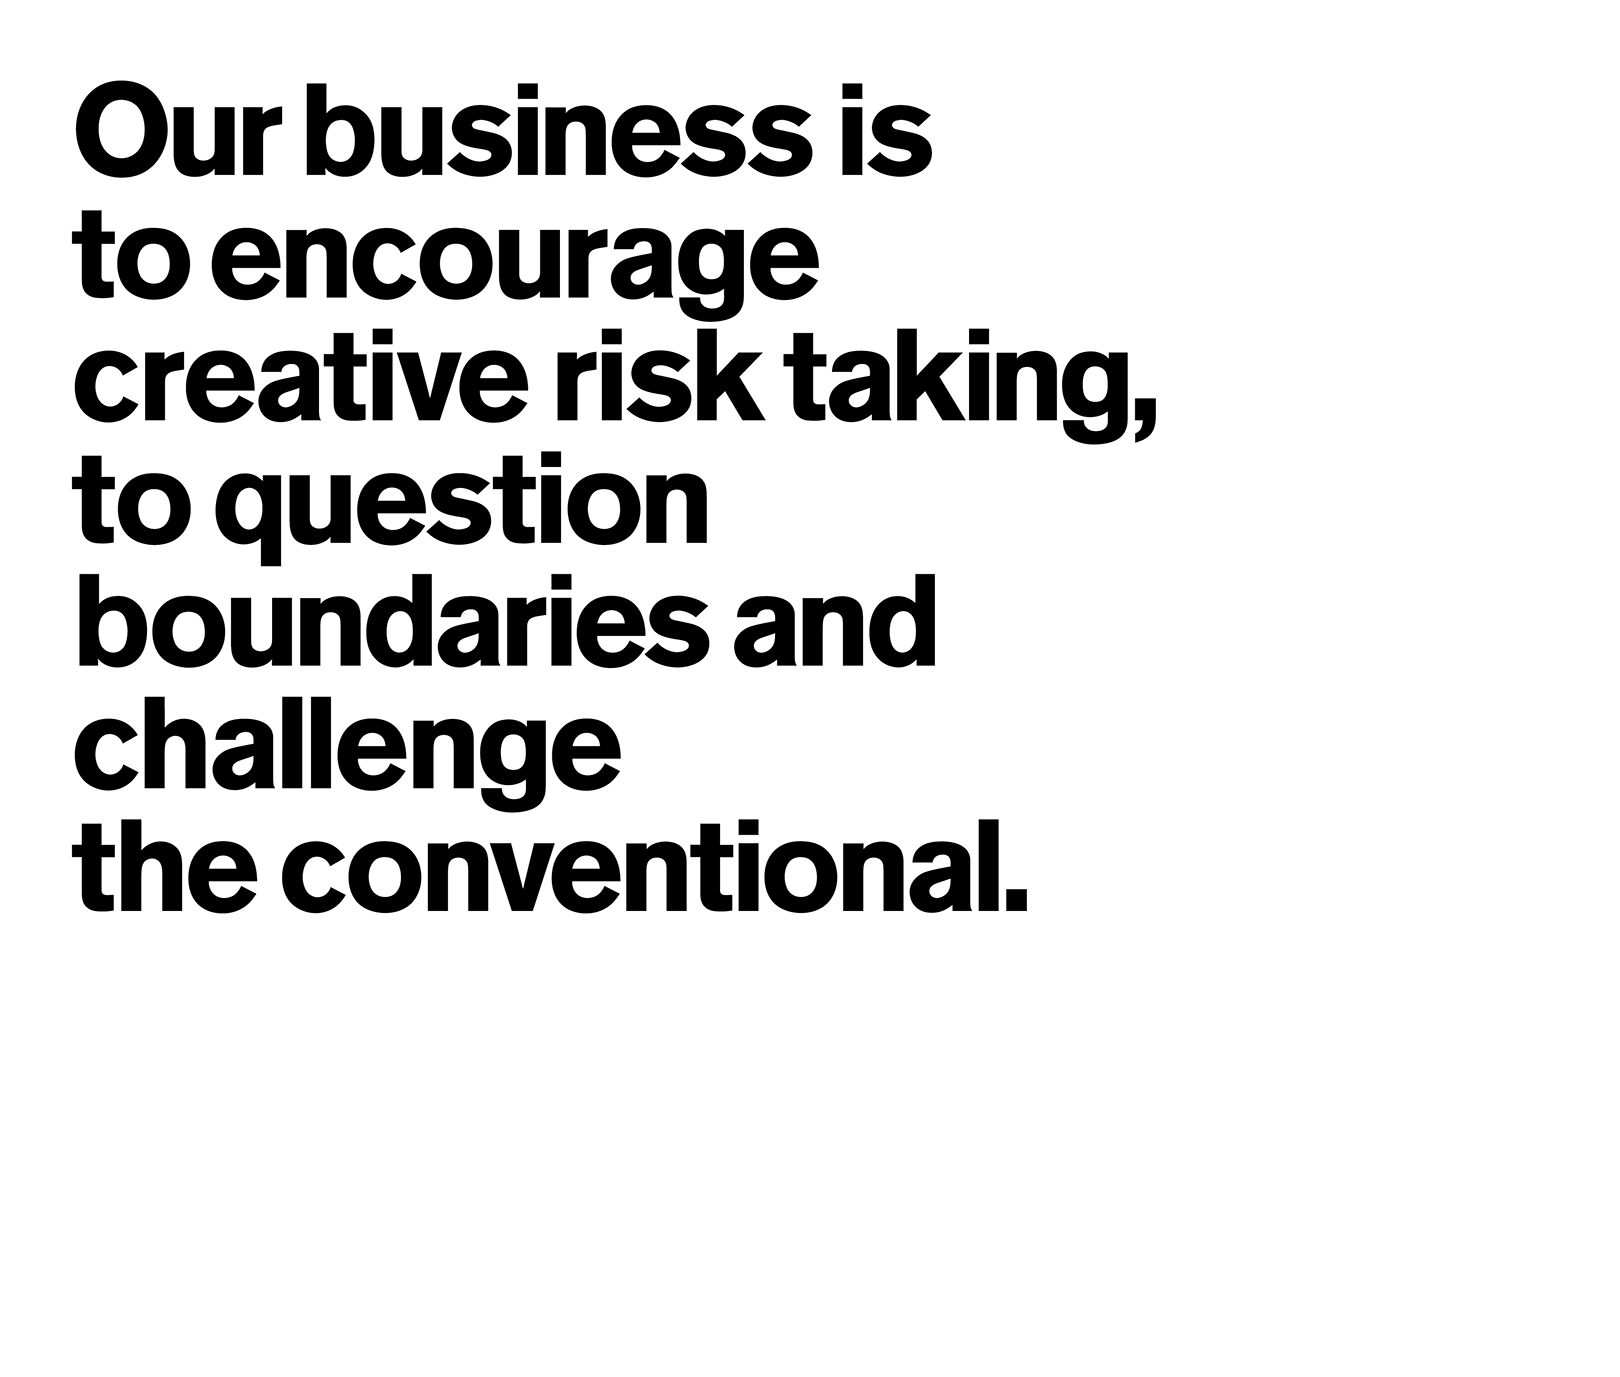 Our business is to encourage creative risk taking, to question boundaries and challenge the conventional.